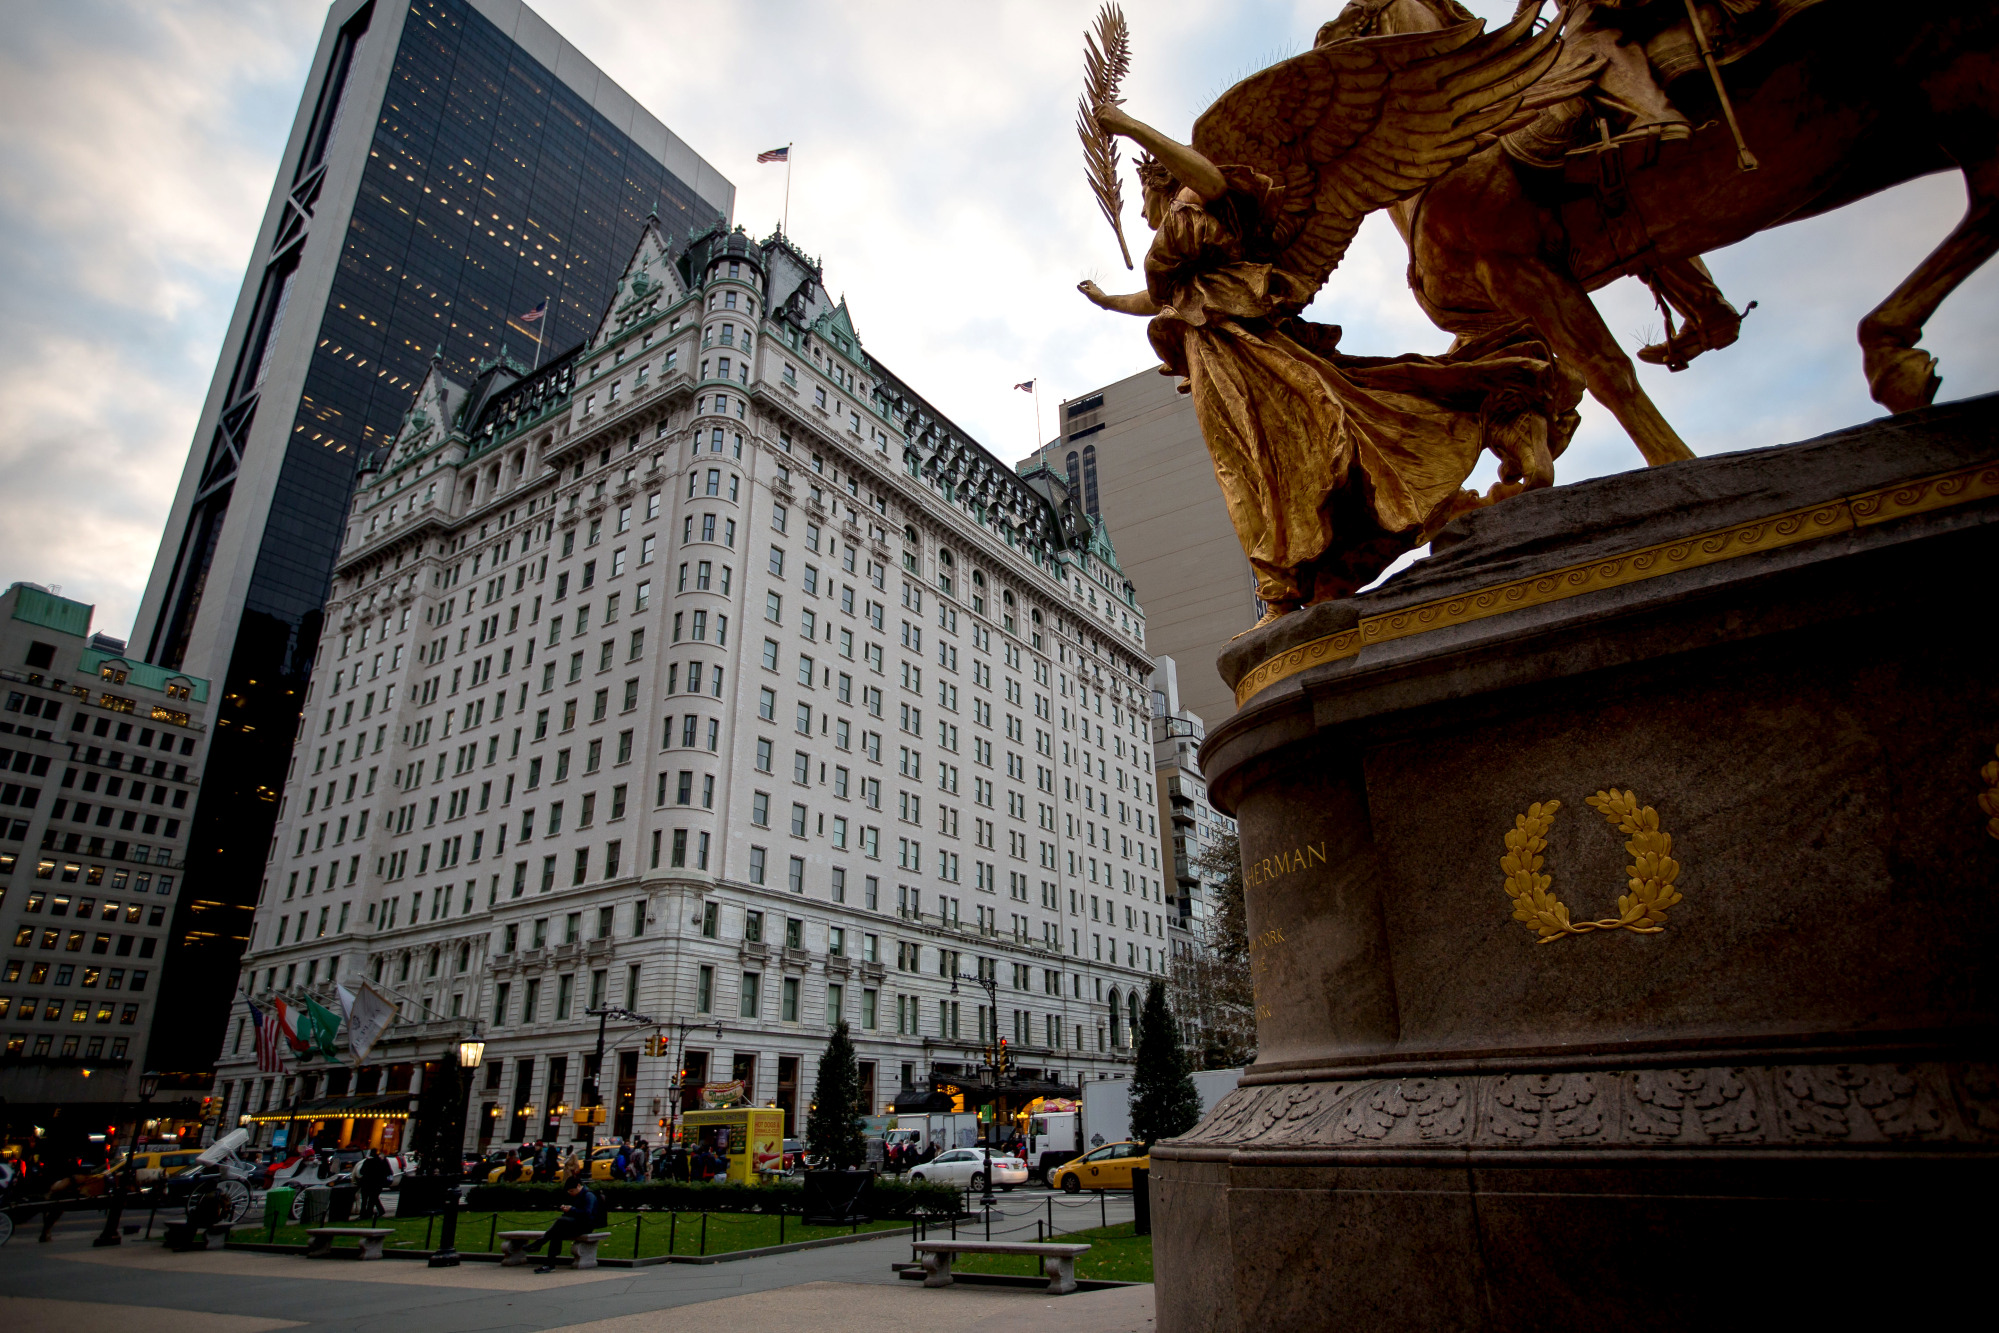 New York's Plaza Hotel Has Third Suitor Join Battle for Control - Bloomberg